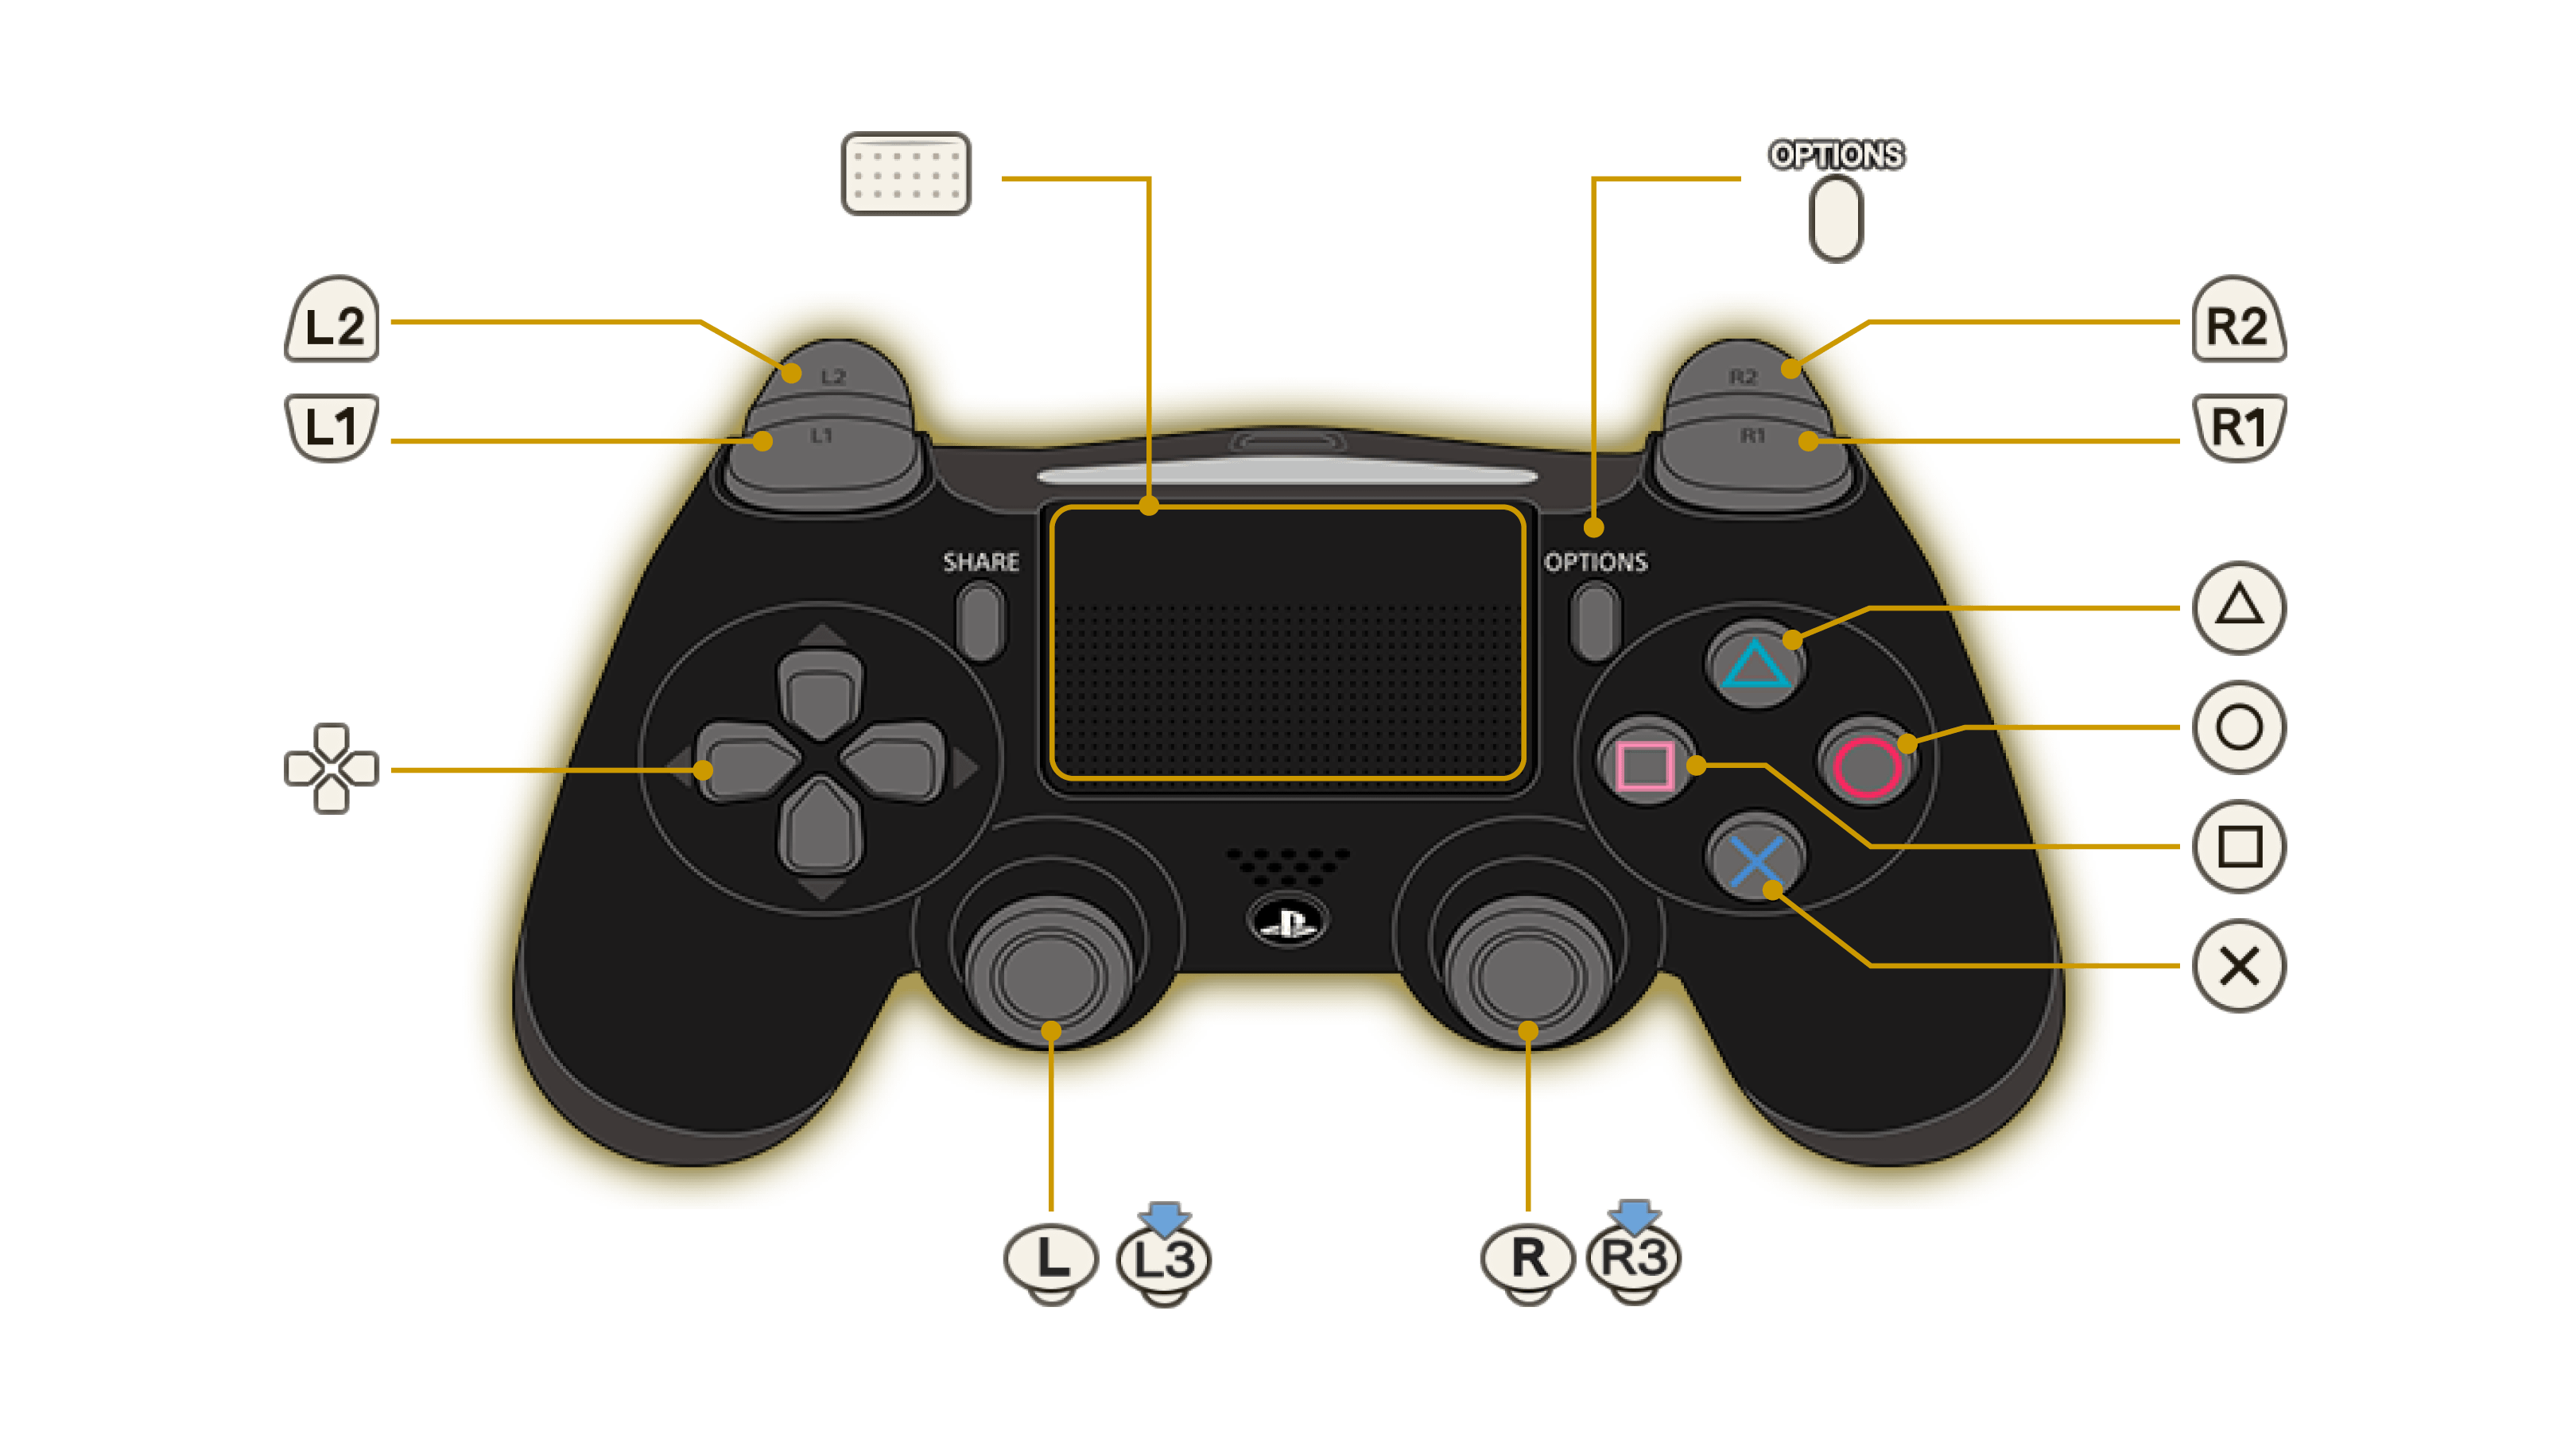 Where is the R button on a PS4 controller? - Quora